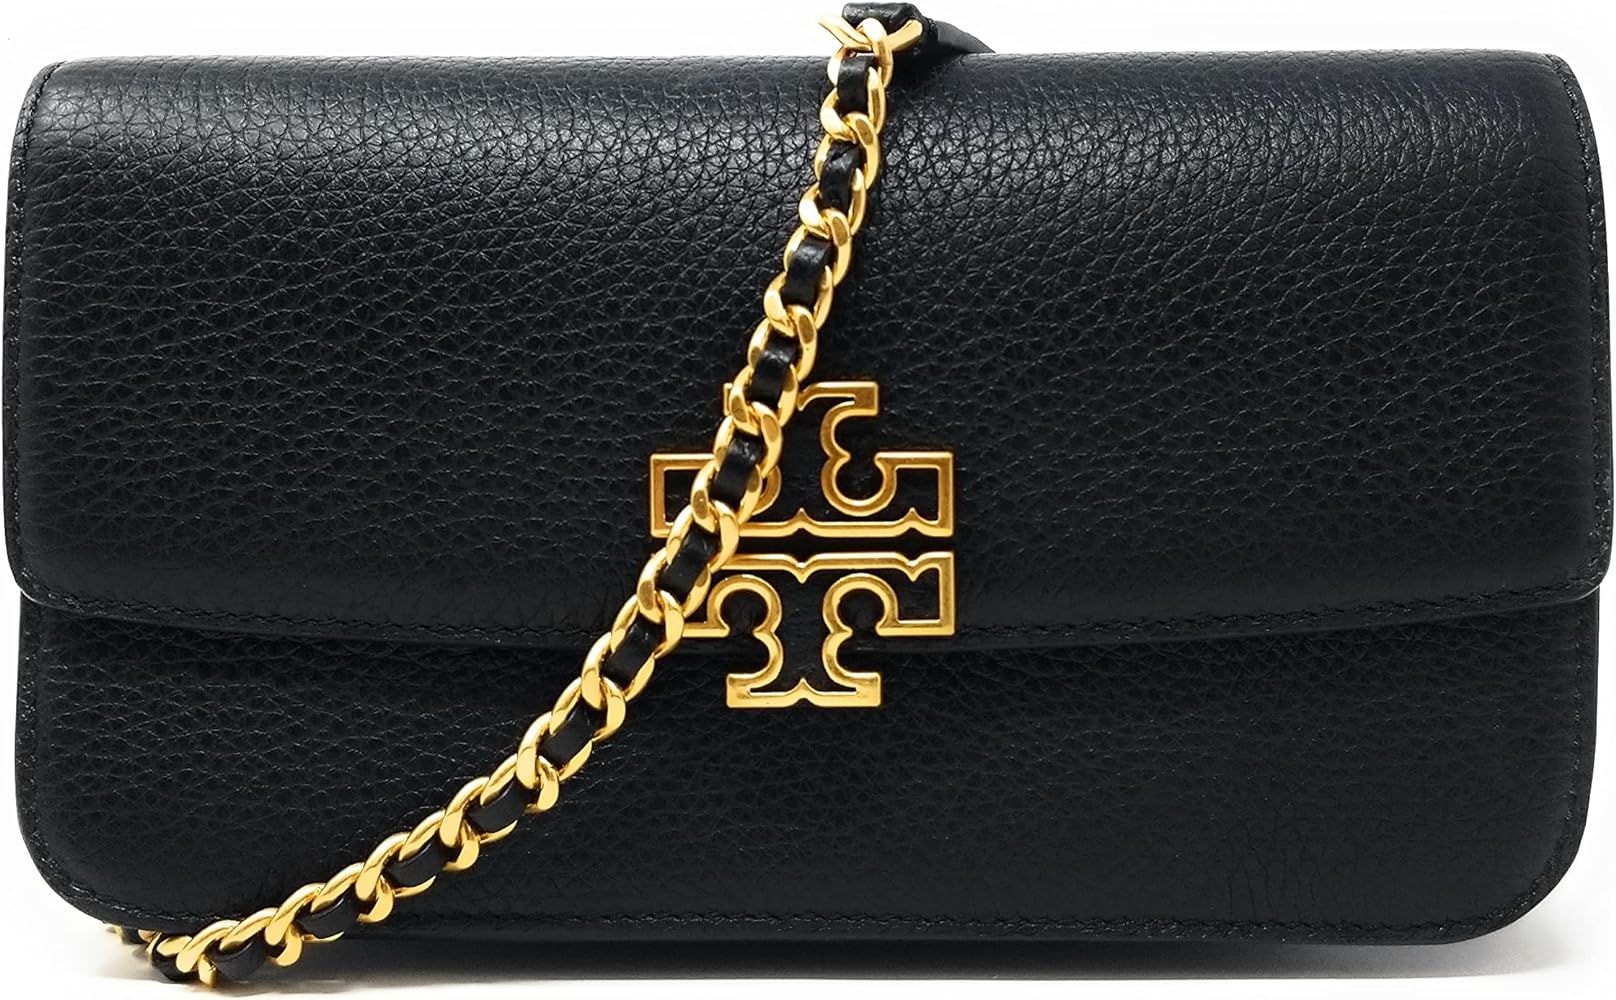 Tory Burch Women's Britten Chain Wallet with Wristlet (Pebbled Leather, Black) | Amazon (US)